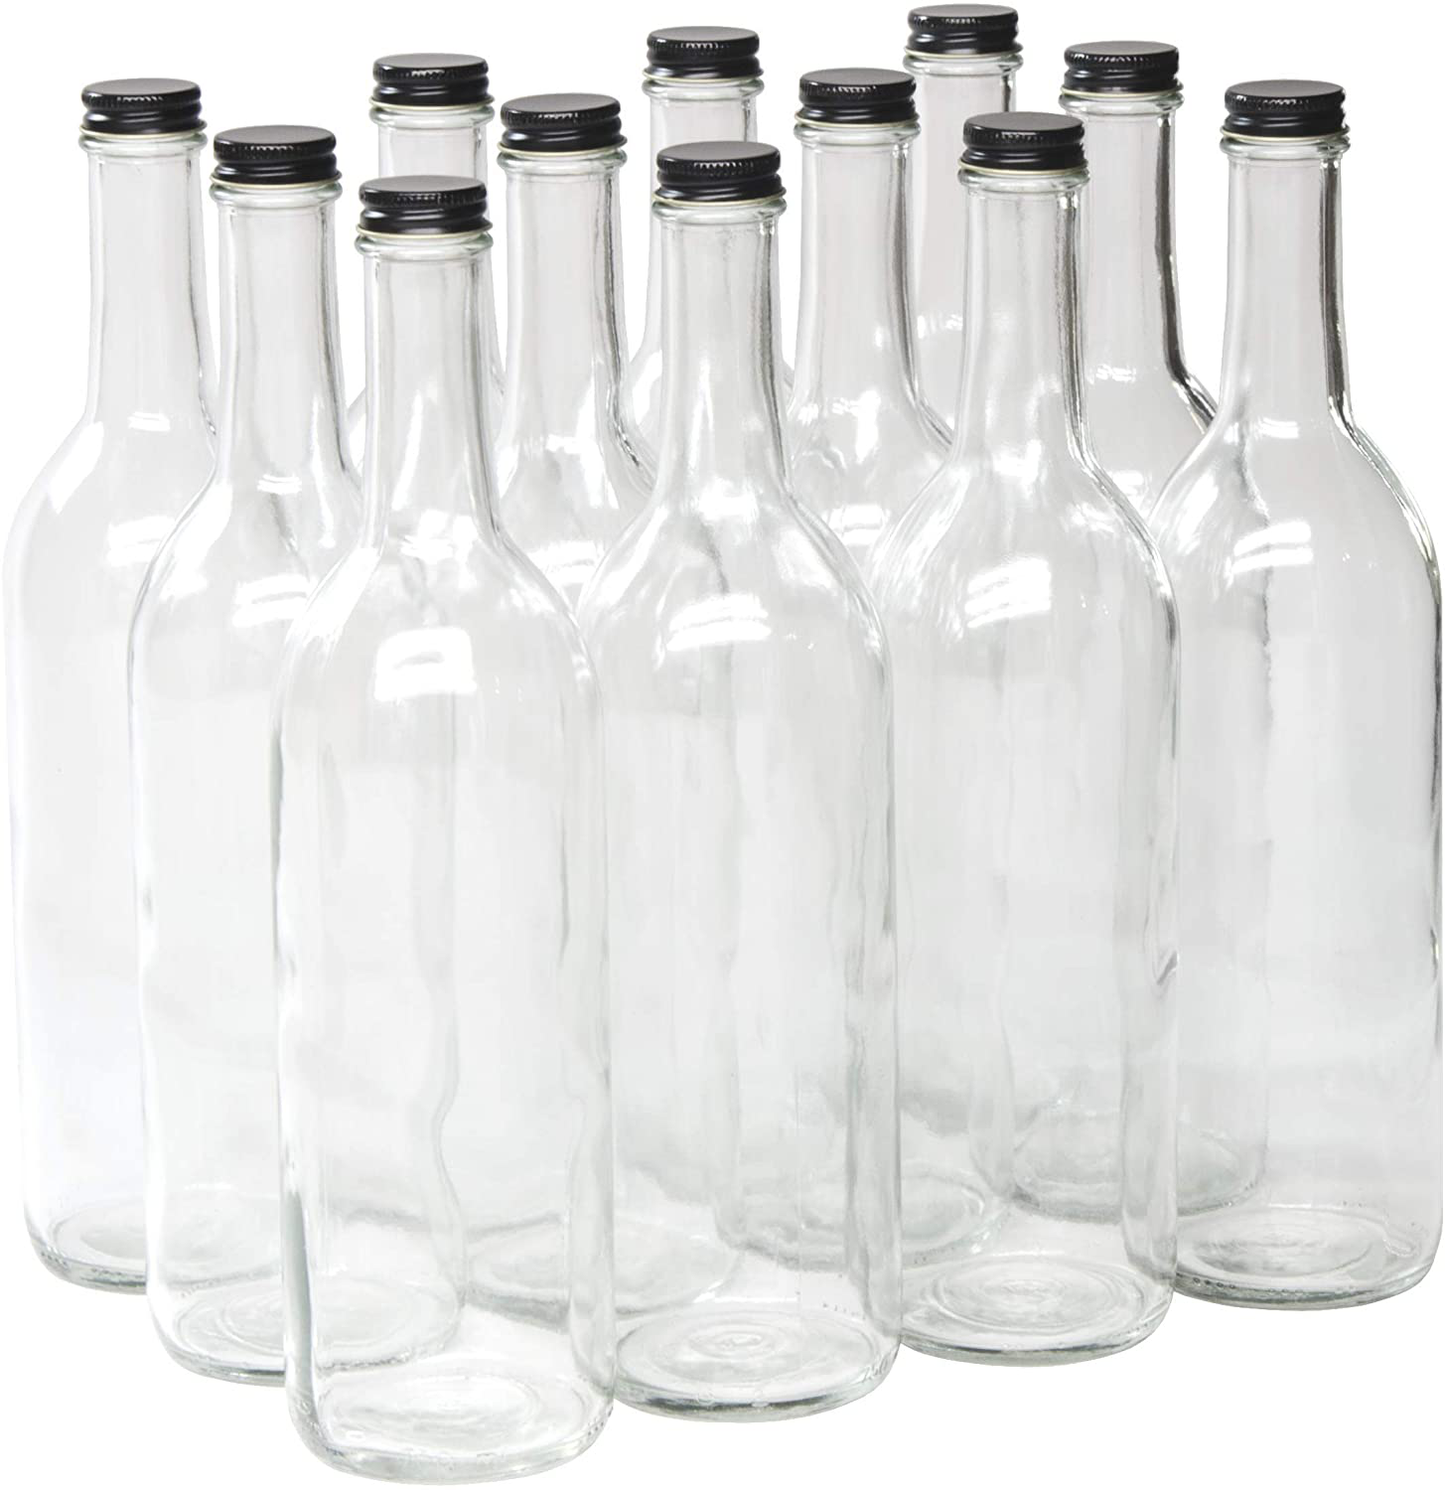 North Mountain Supply - W5CTCL-WT 750ml Clear Glass Bordeaux Wine Bottle Flat-Bottomed Screw-Top Finish (White Metal Lids)